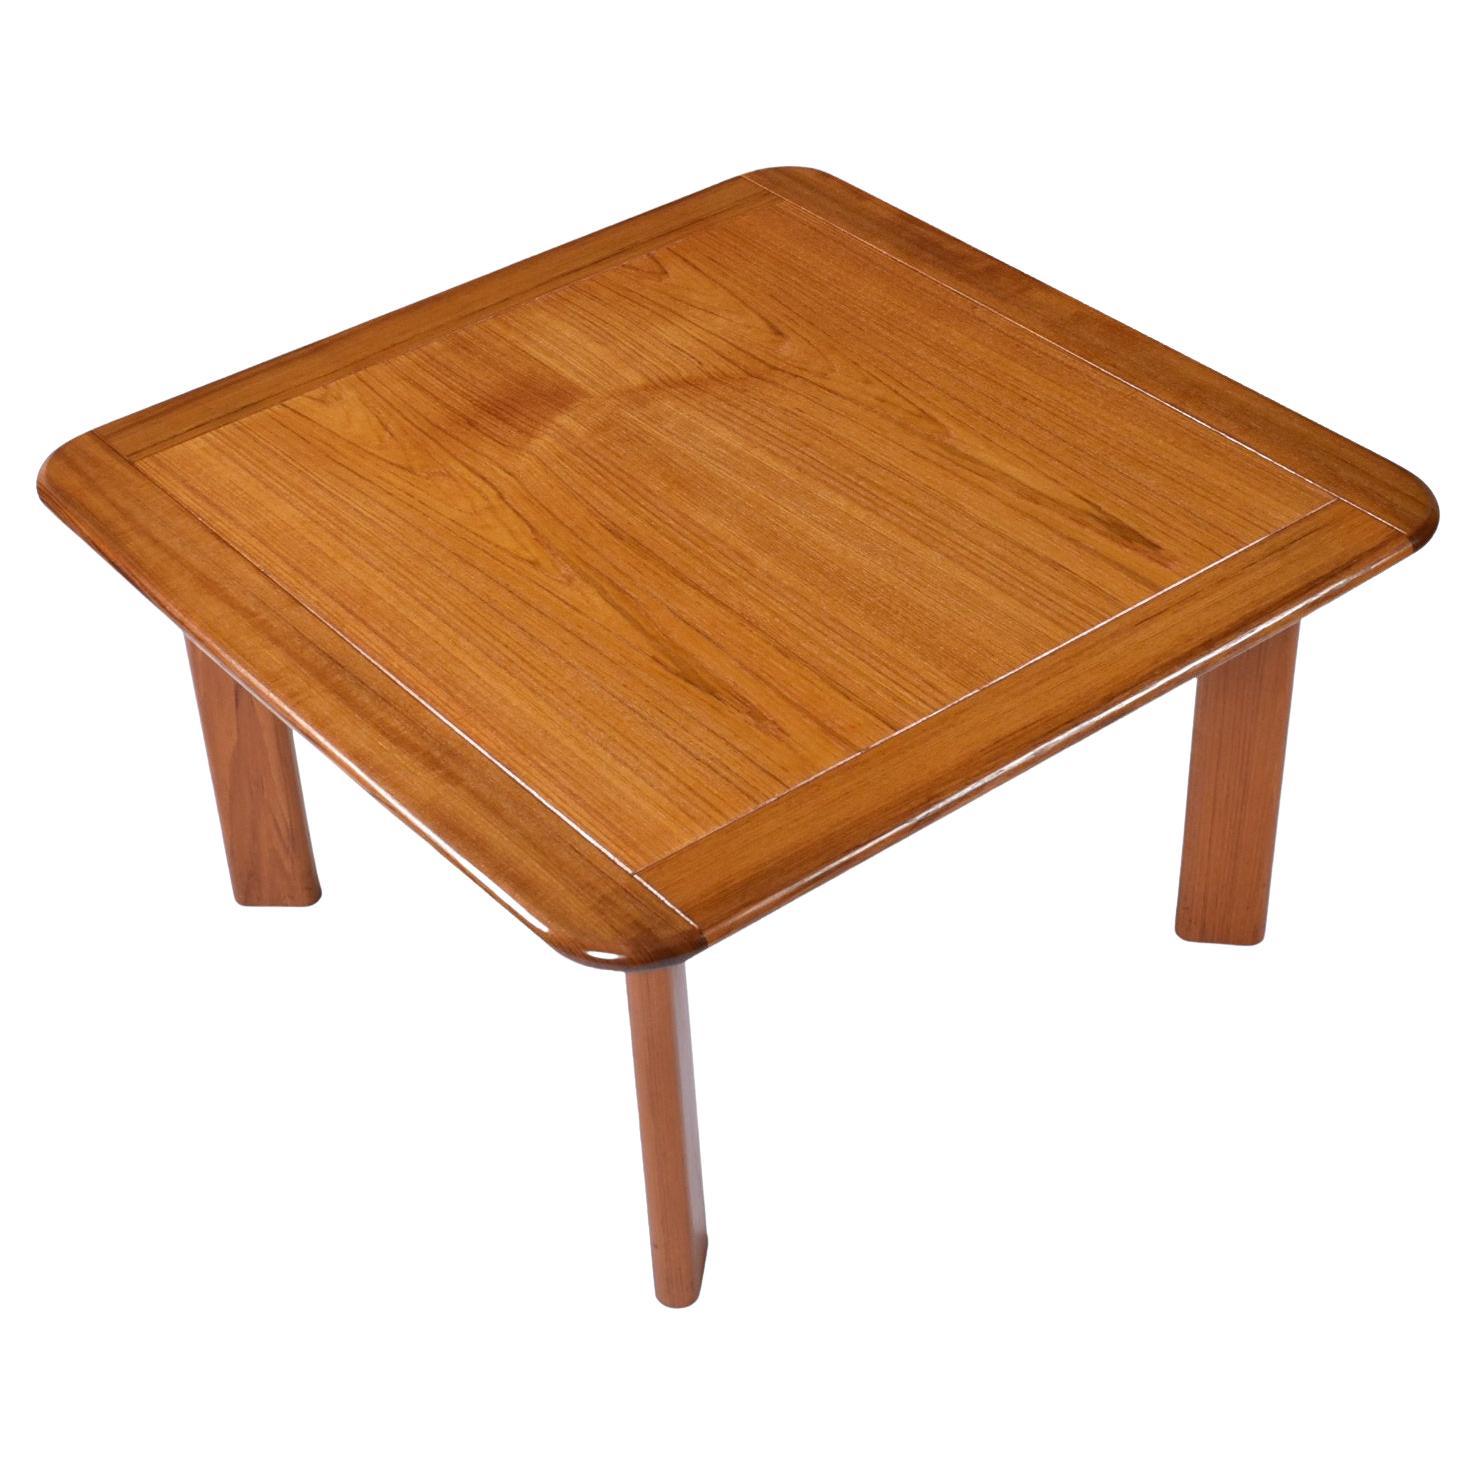 Premium quality vintage Danish Modern square coffee table or large side table. This piece is built like a champ! Outstanding quality, solid teak throughout. The Danish Modern coffee table is 36.5″ square and could be used as a large side table. The